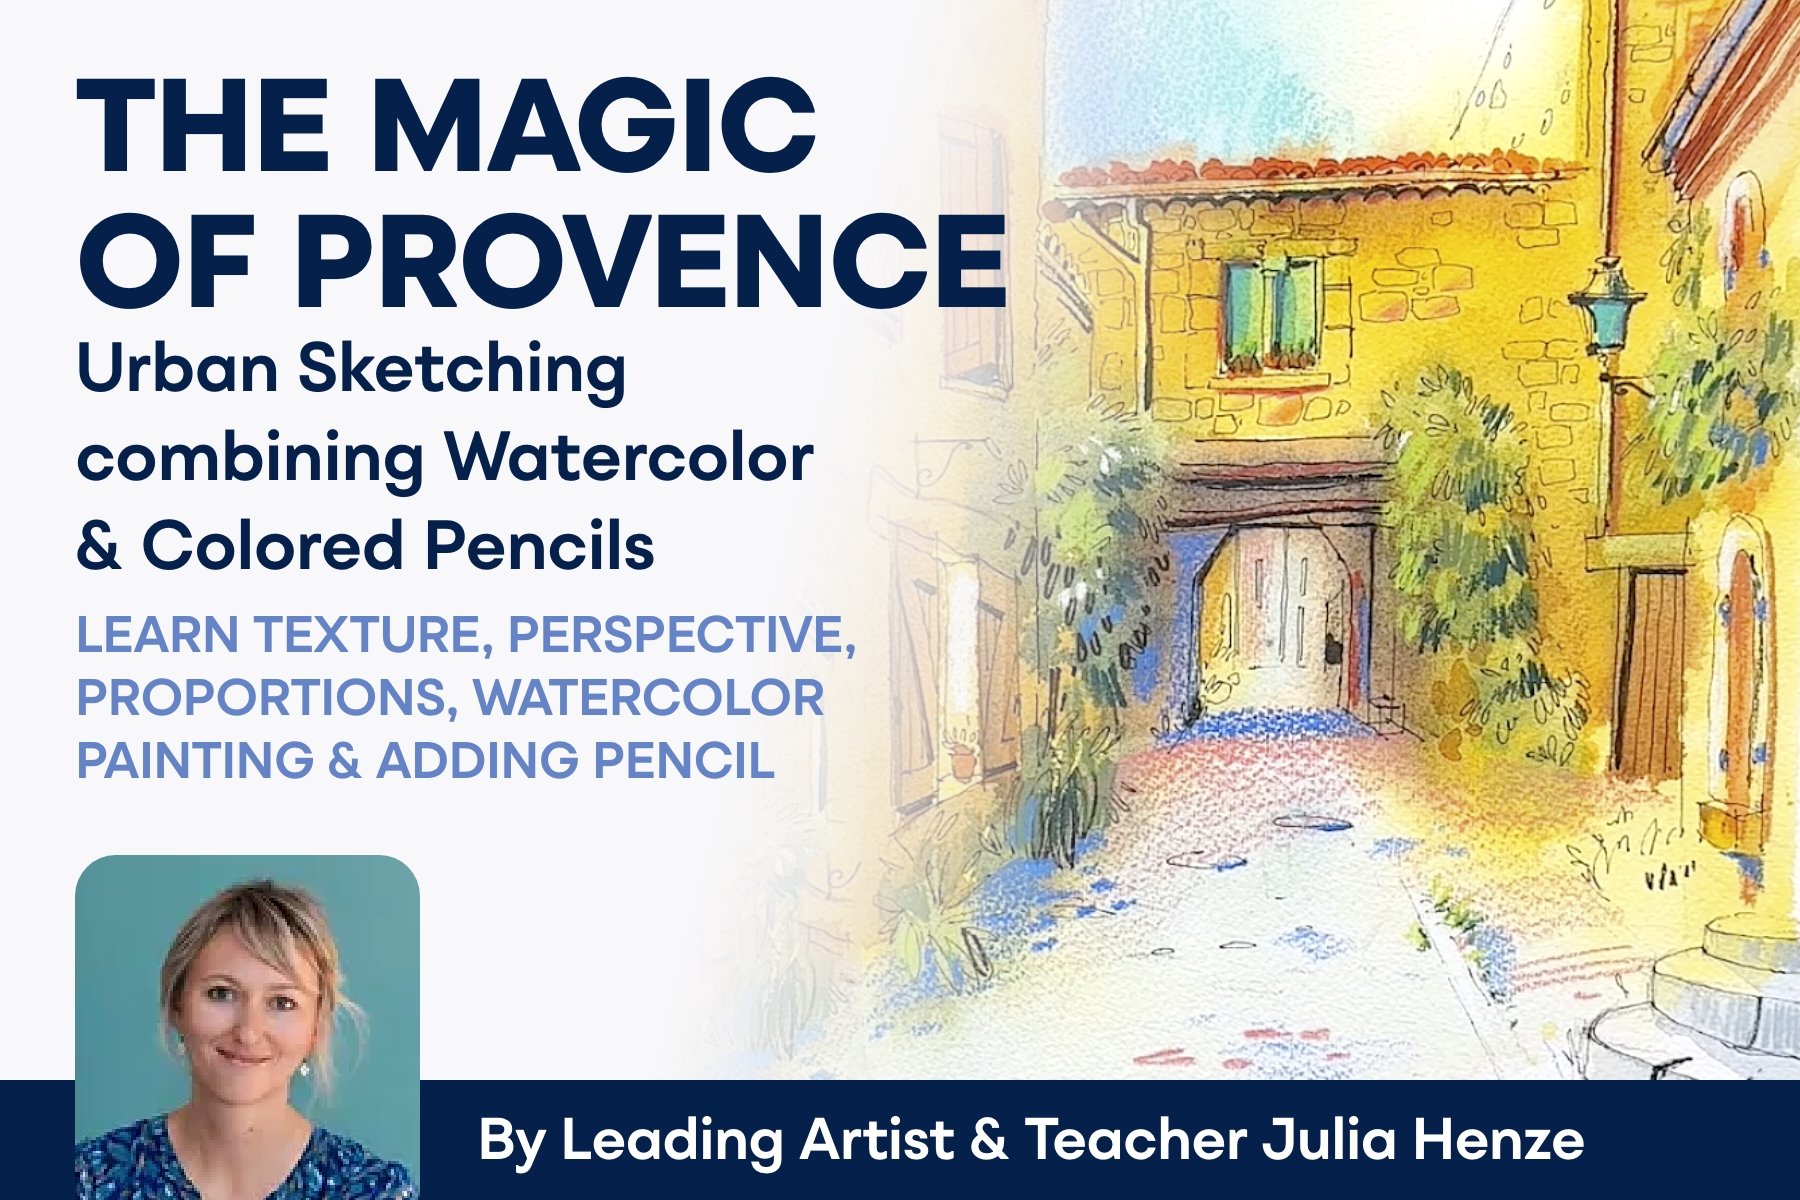 The Magic of Provence: Urban Sketching with Watercolor and Colored Pencils